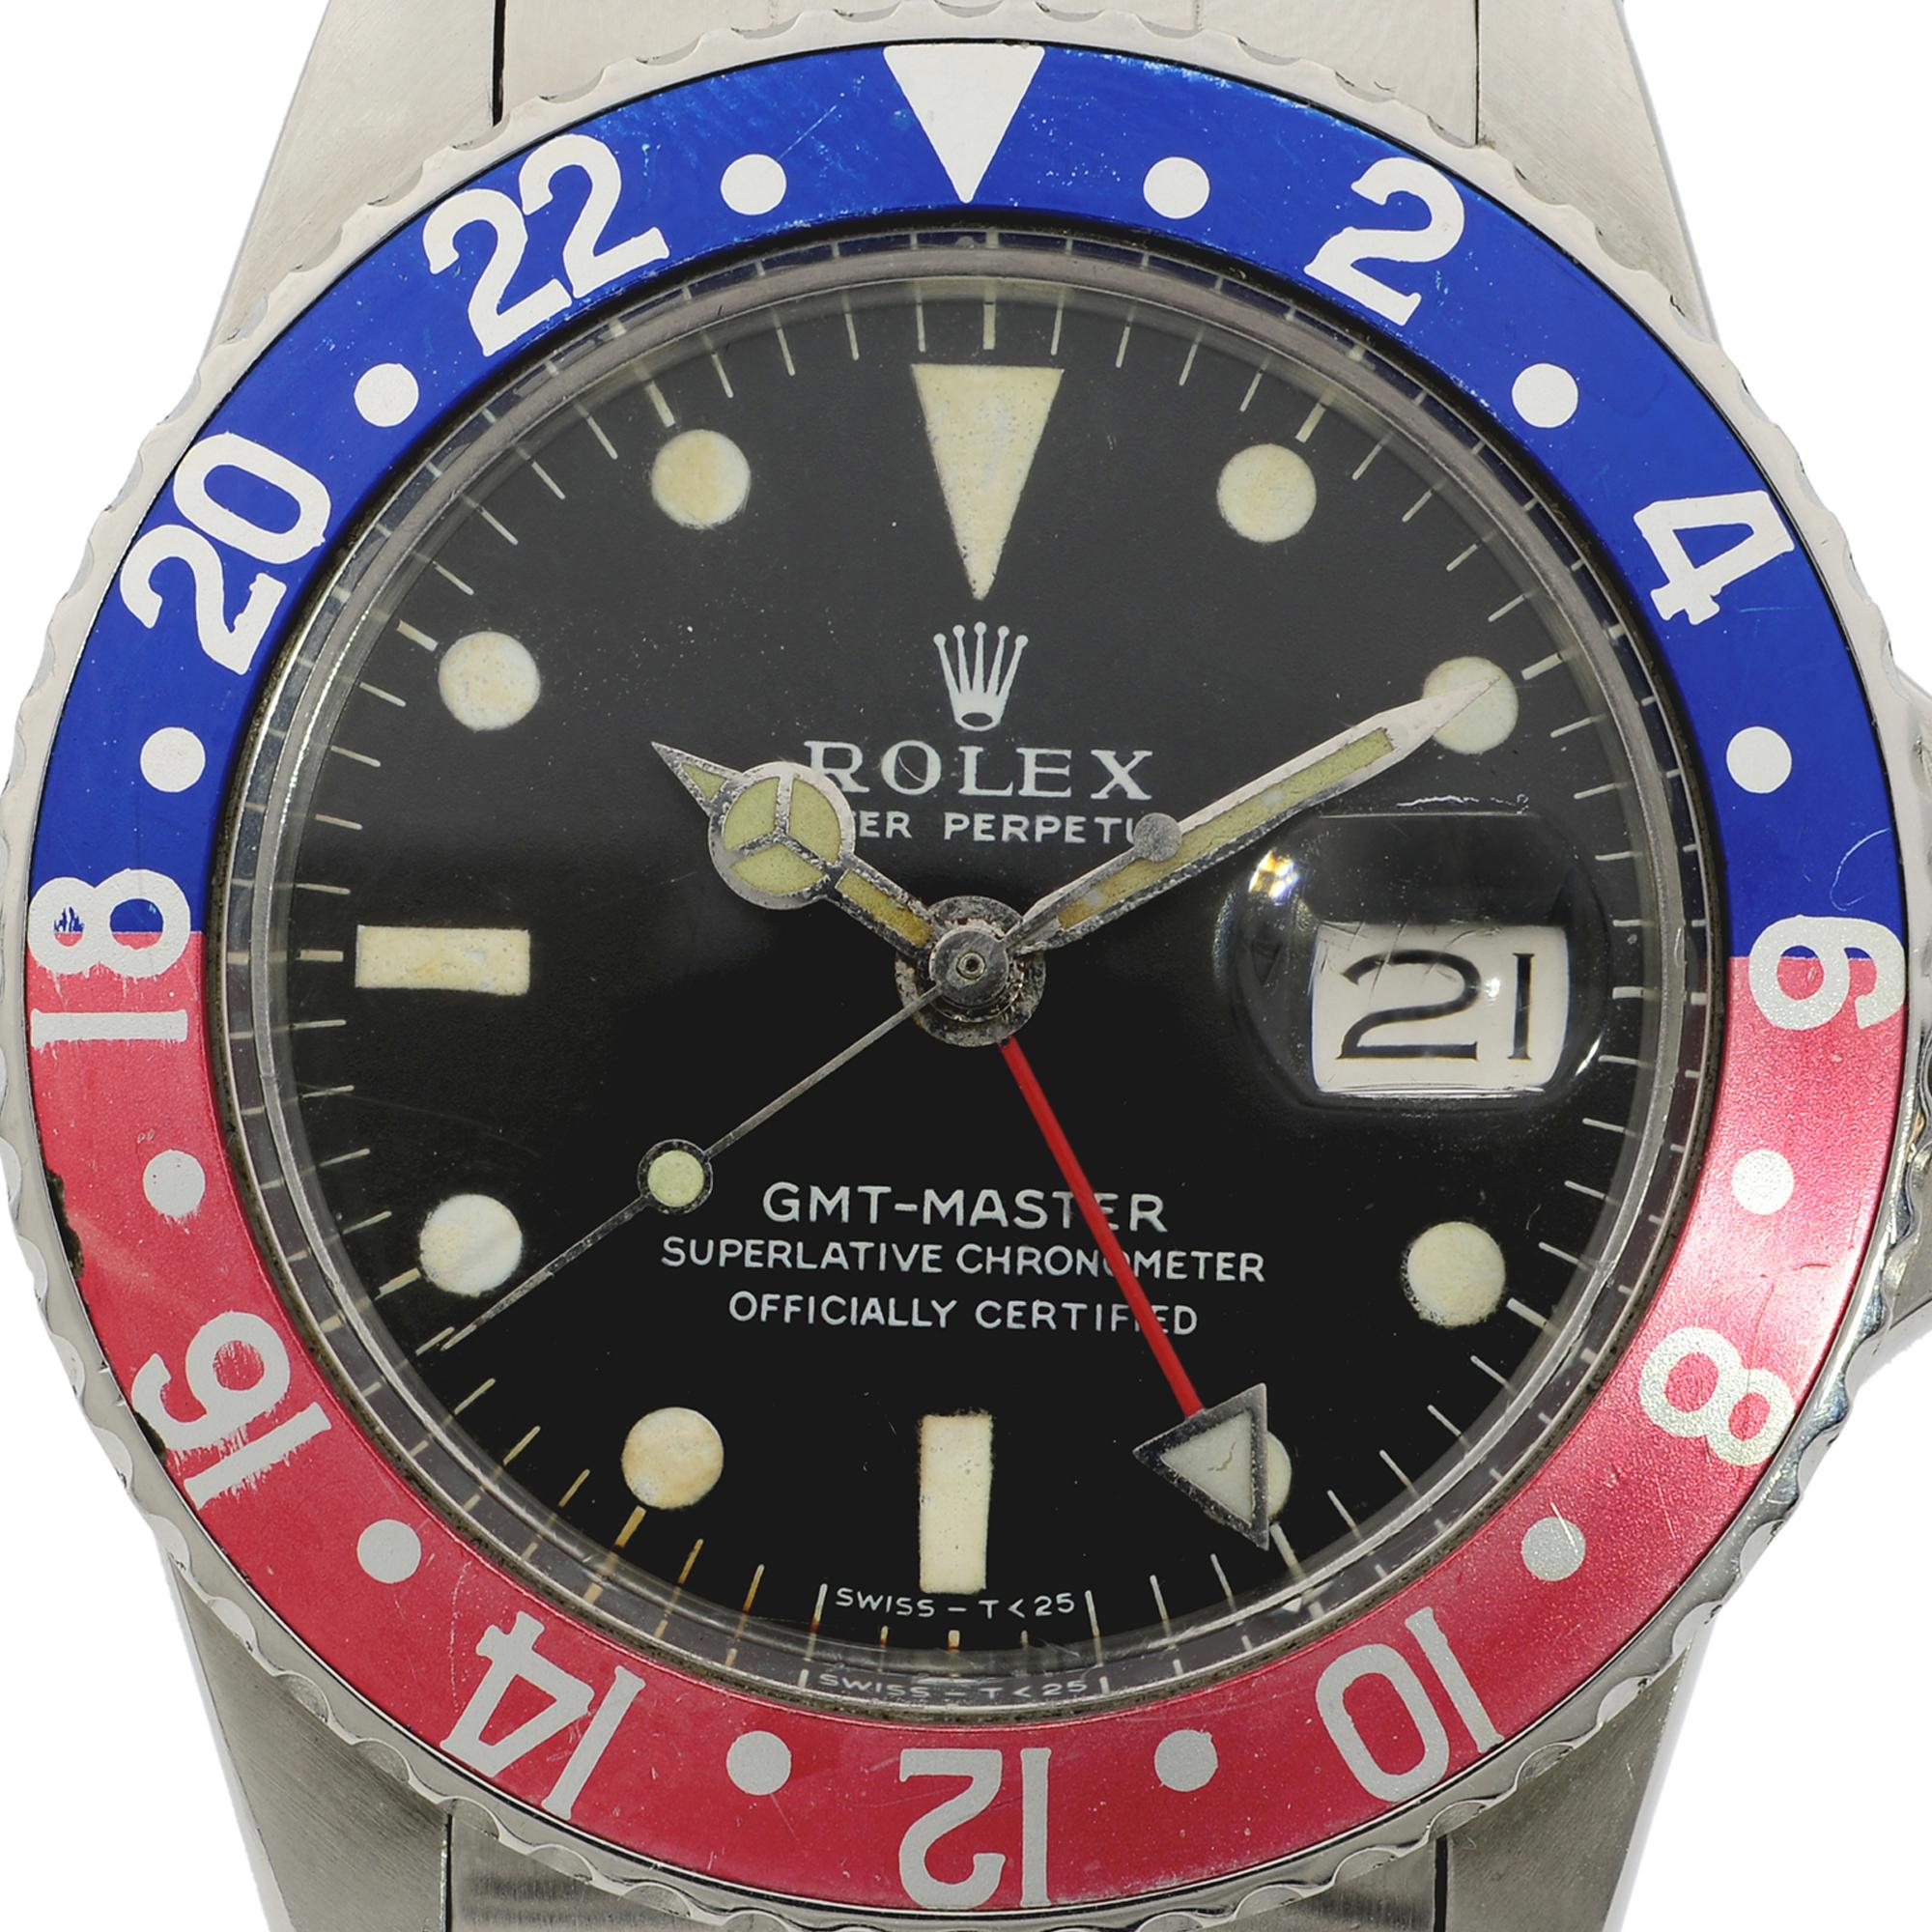 This pre-owned Rolex Gmt-Master 1675 is a beautiful men's timepiece that is powered by mechanical (automatic) movement which is cased in a stainless steel case. It has a round shape face, gmt, date indicator dial and has hand sticks & dots style